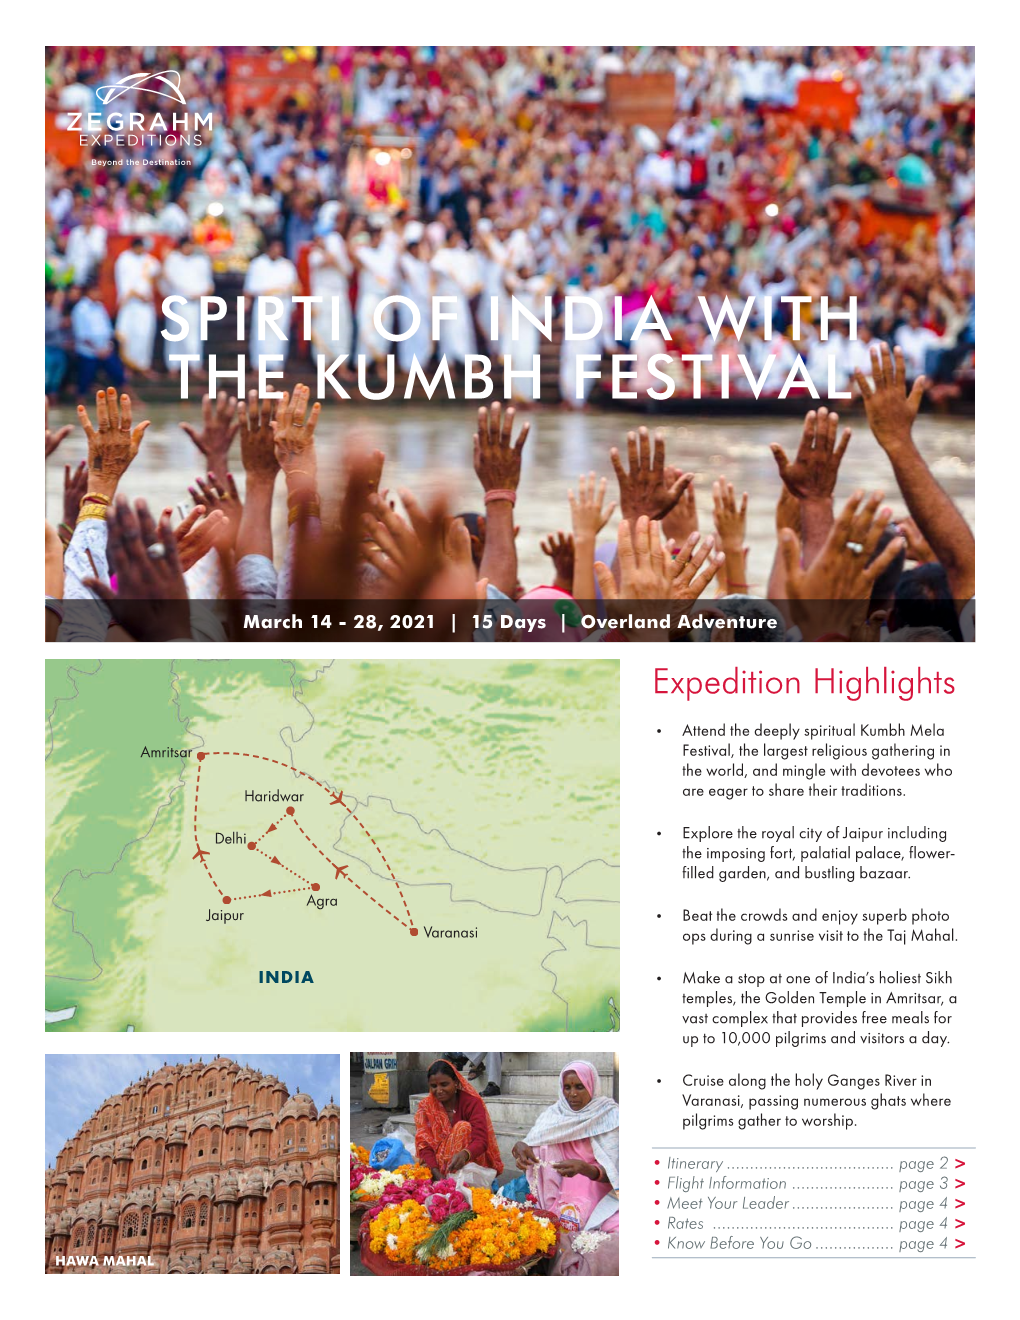 Spirti of India with the Kumbh Festival